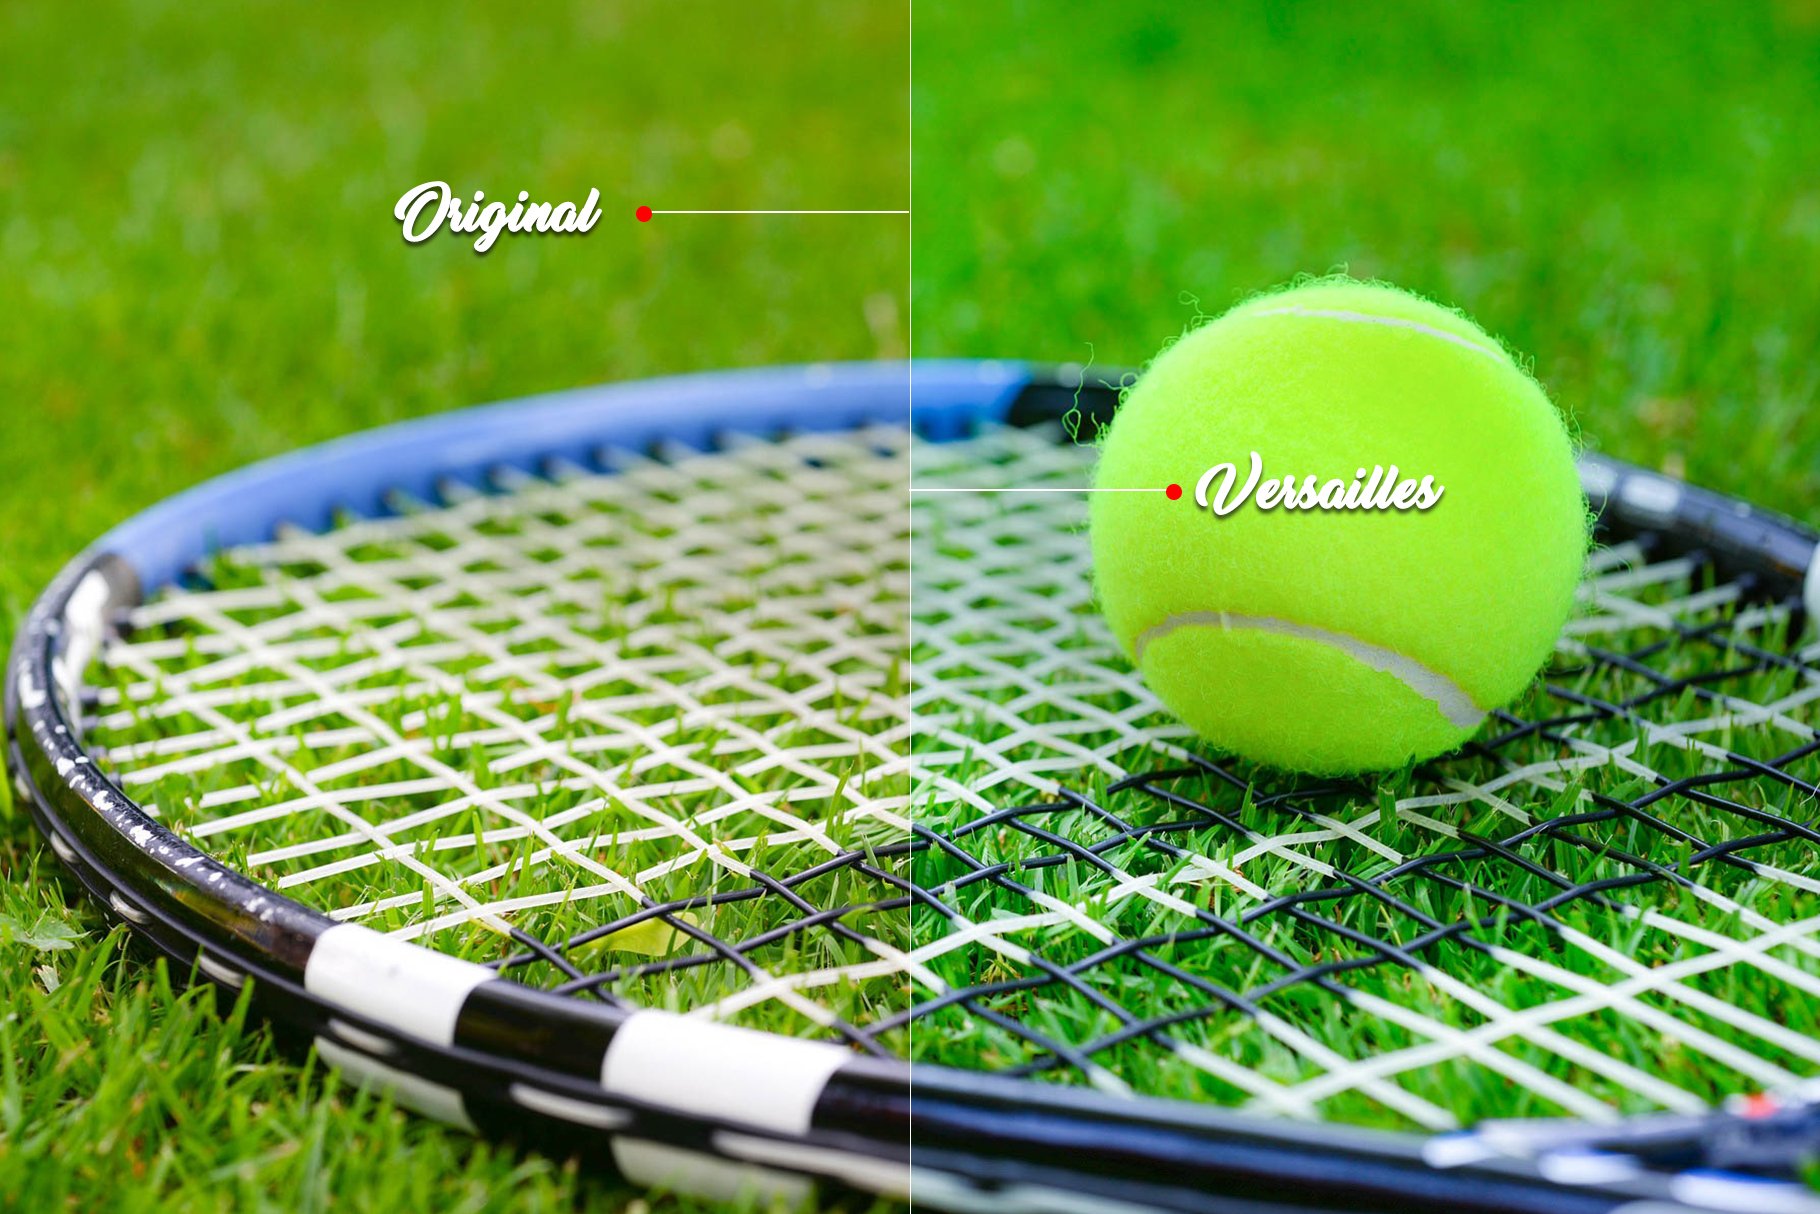 sports lightroom and photoshop presets by pixelspic illustrative image versailles 948